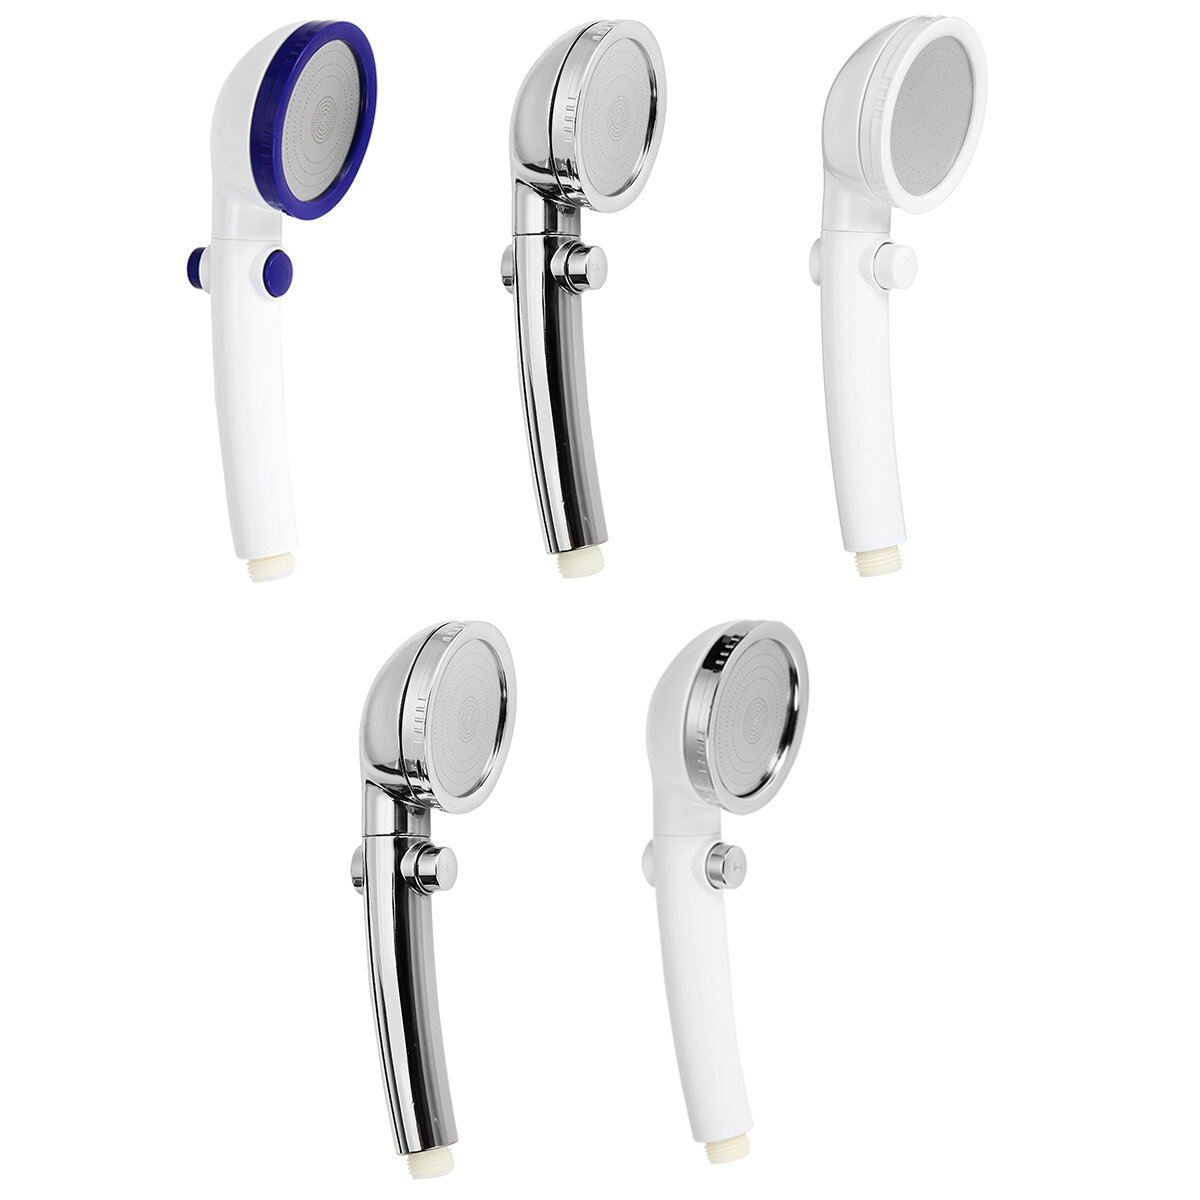 One Button Water Stop Pressurized Shower Shower Nozzle Household Hand Held Shower Rain Shower Nozzle Shower